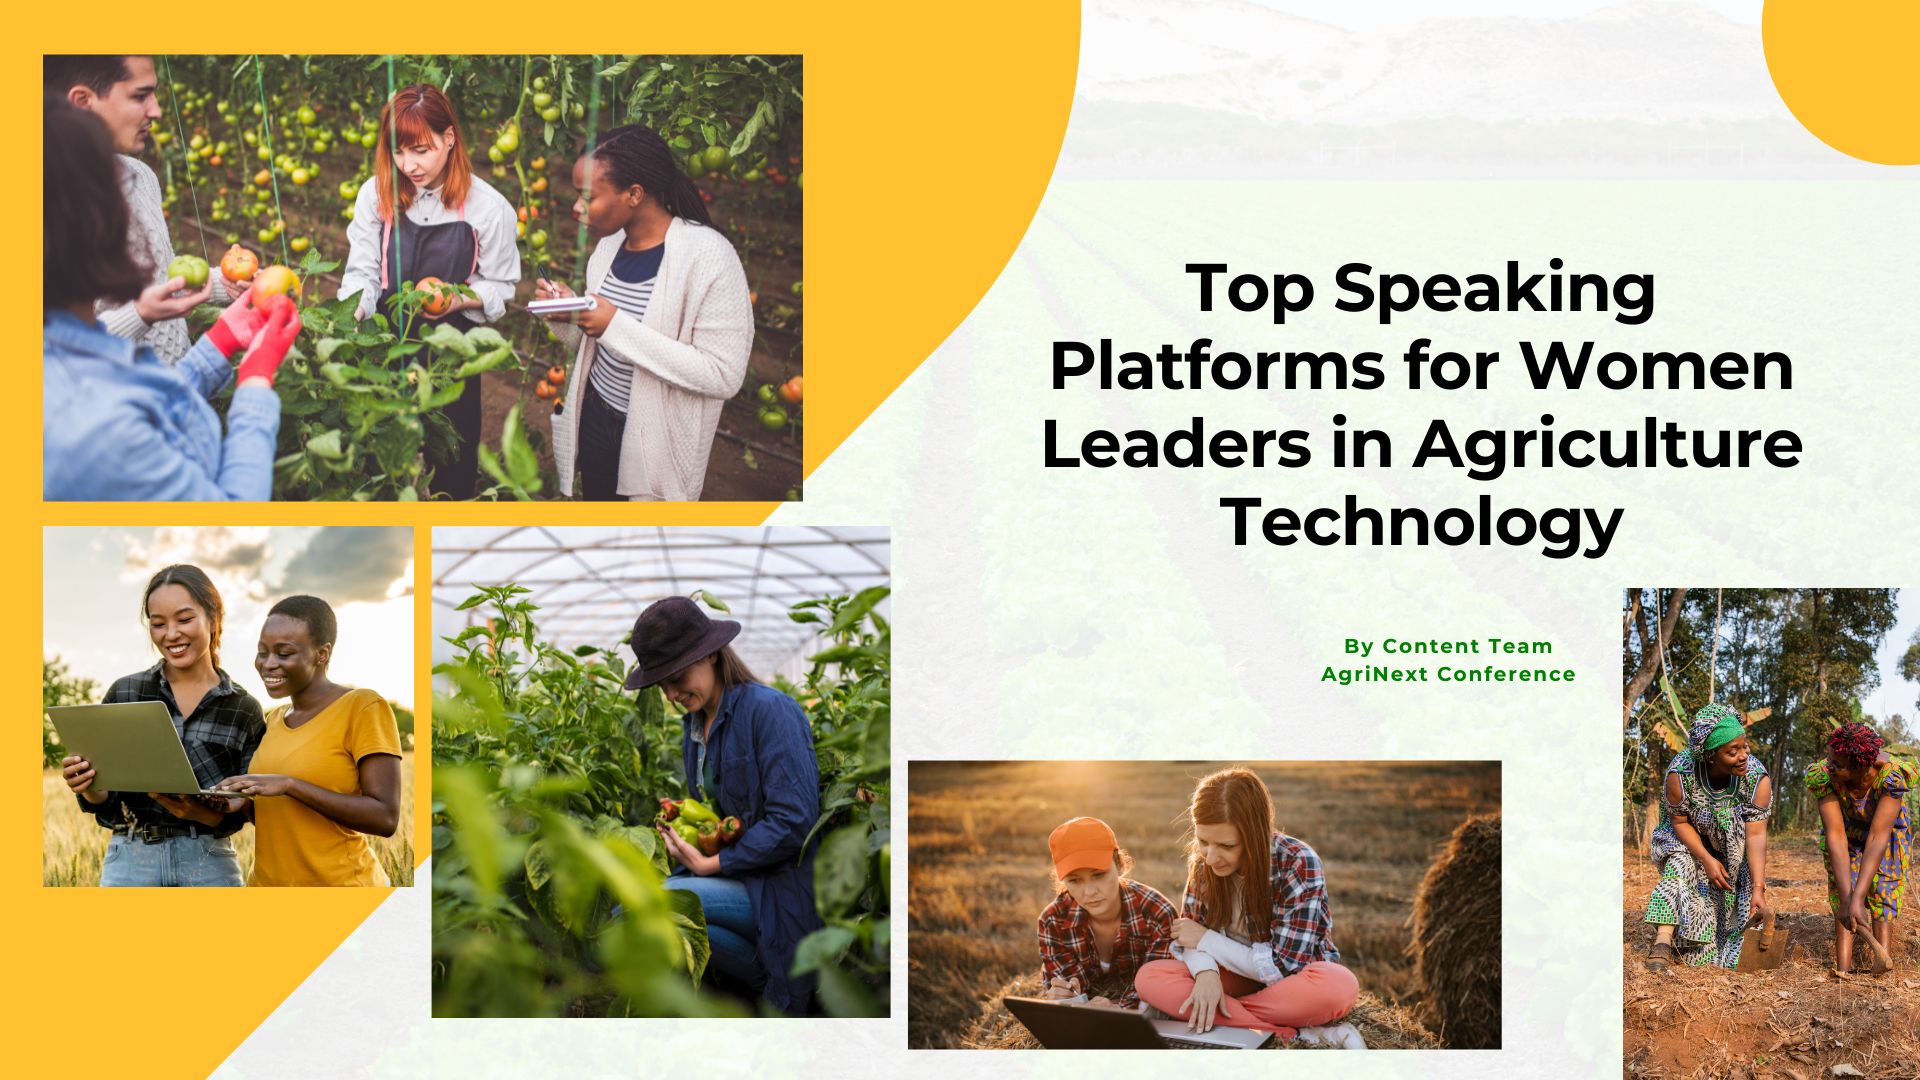 Top Speaking Platforms for Women Leaders in Agriculture Technology